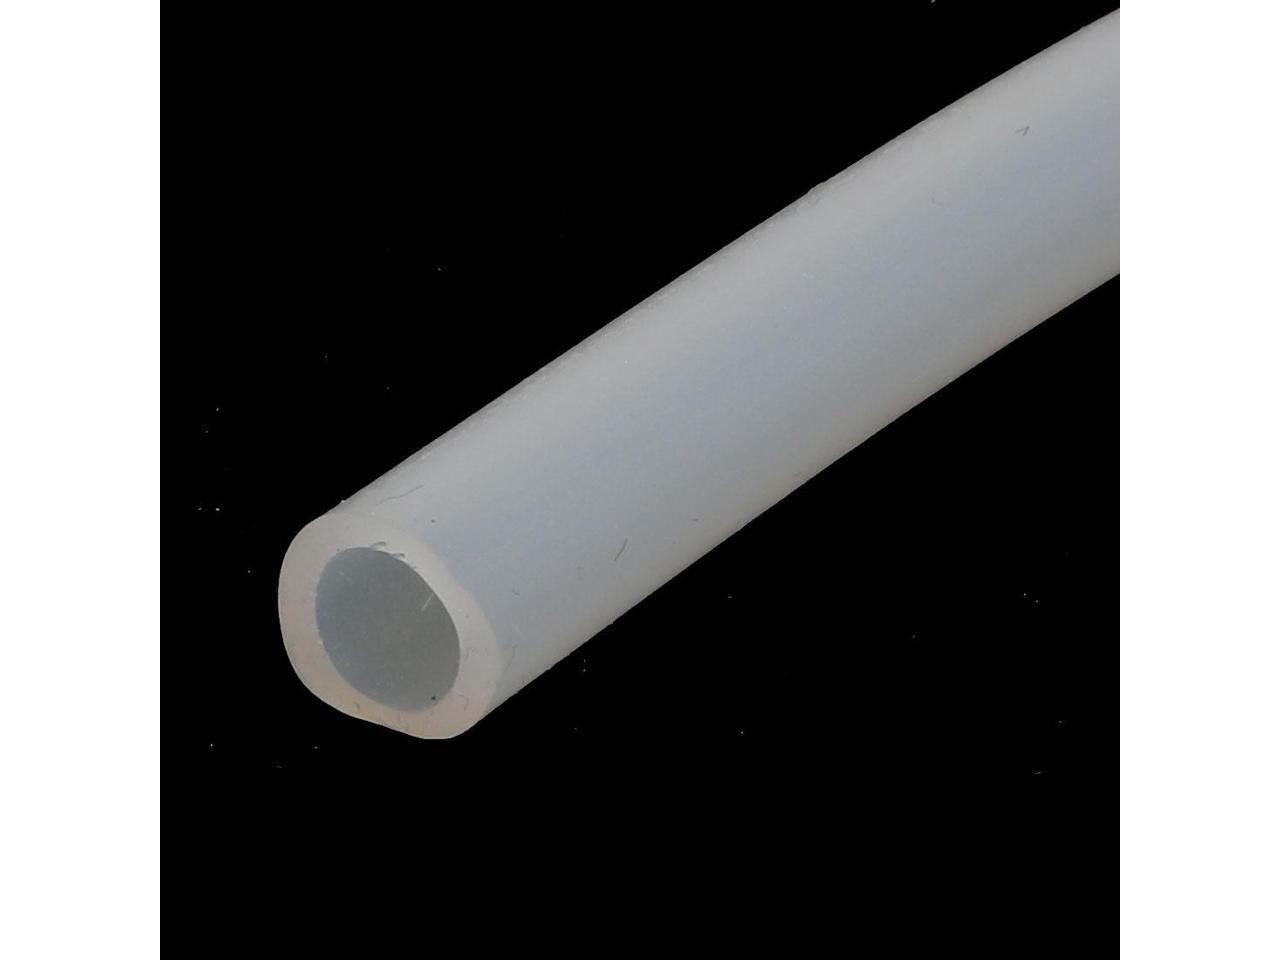 7mm x 10mm Heat Resistant Soft Silicone Tube Hose Pipe 2M Long Milky White 609876577977 